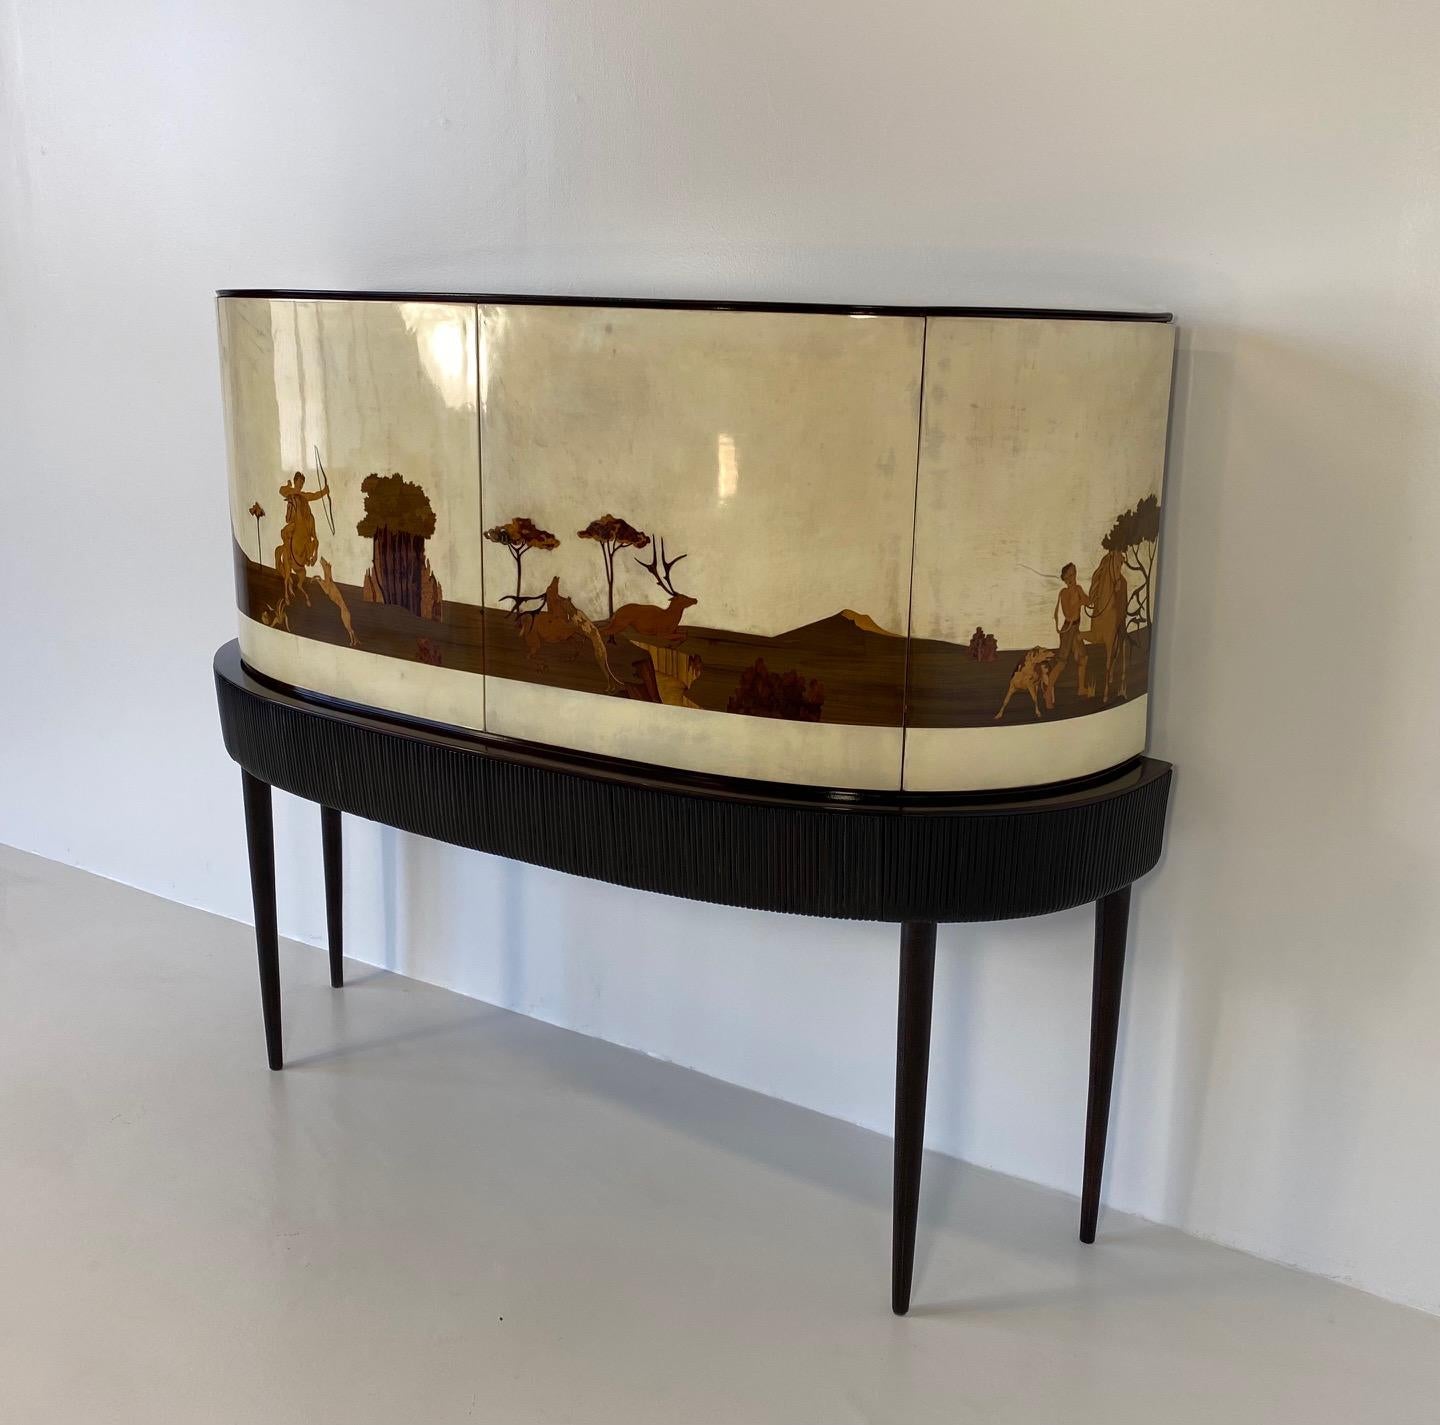 Glass Italian Art Deco Bar Cabinet in Parchment with Inlays Signed by Anzani, 1930s For Sale